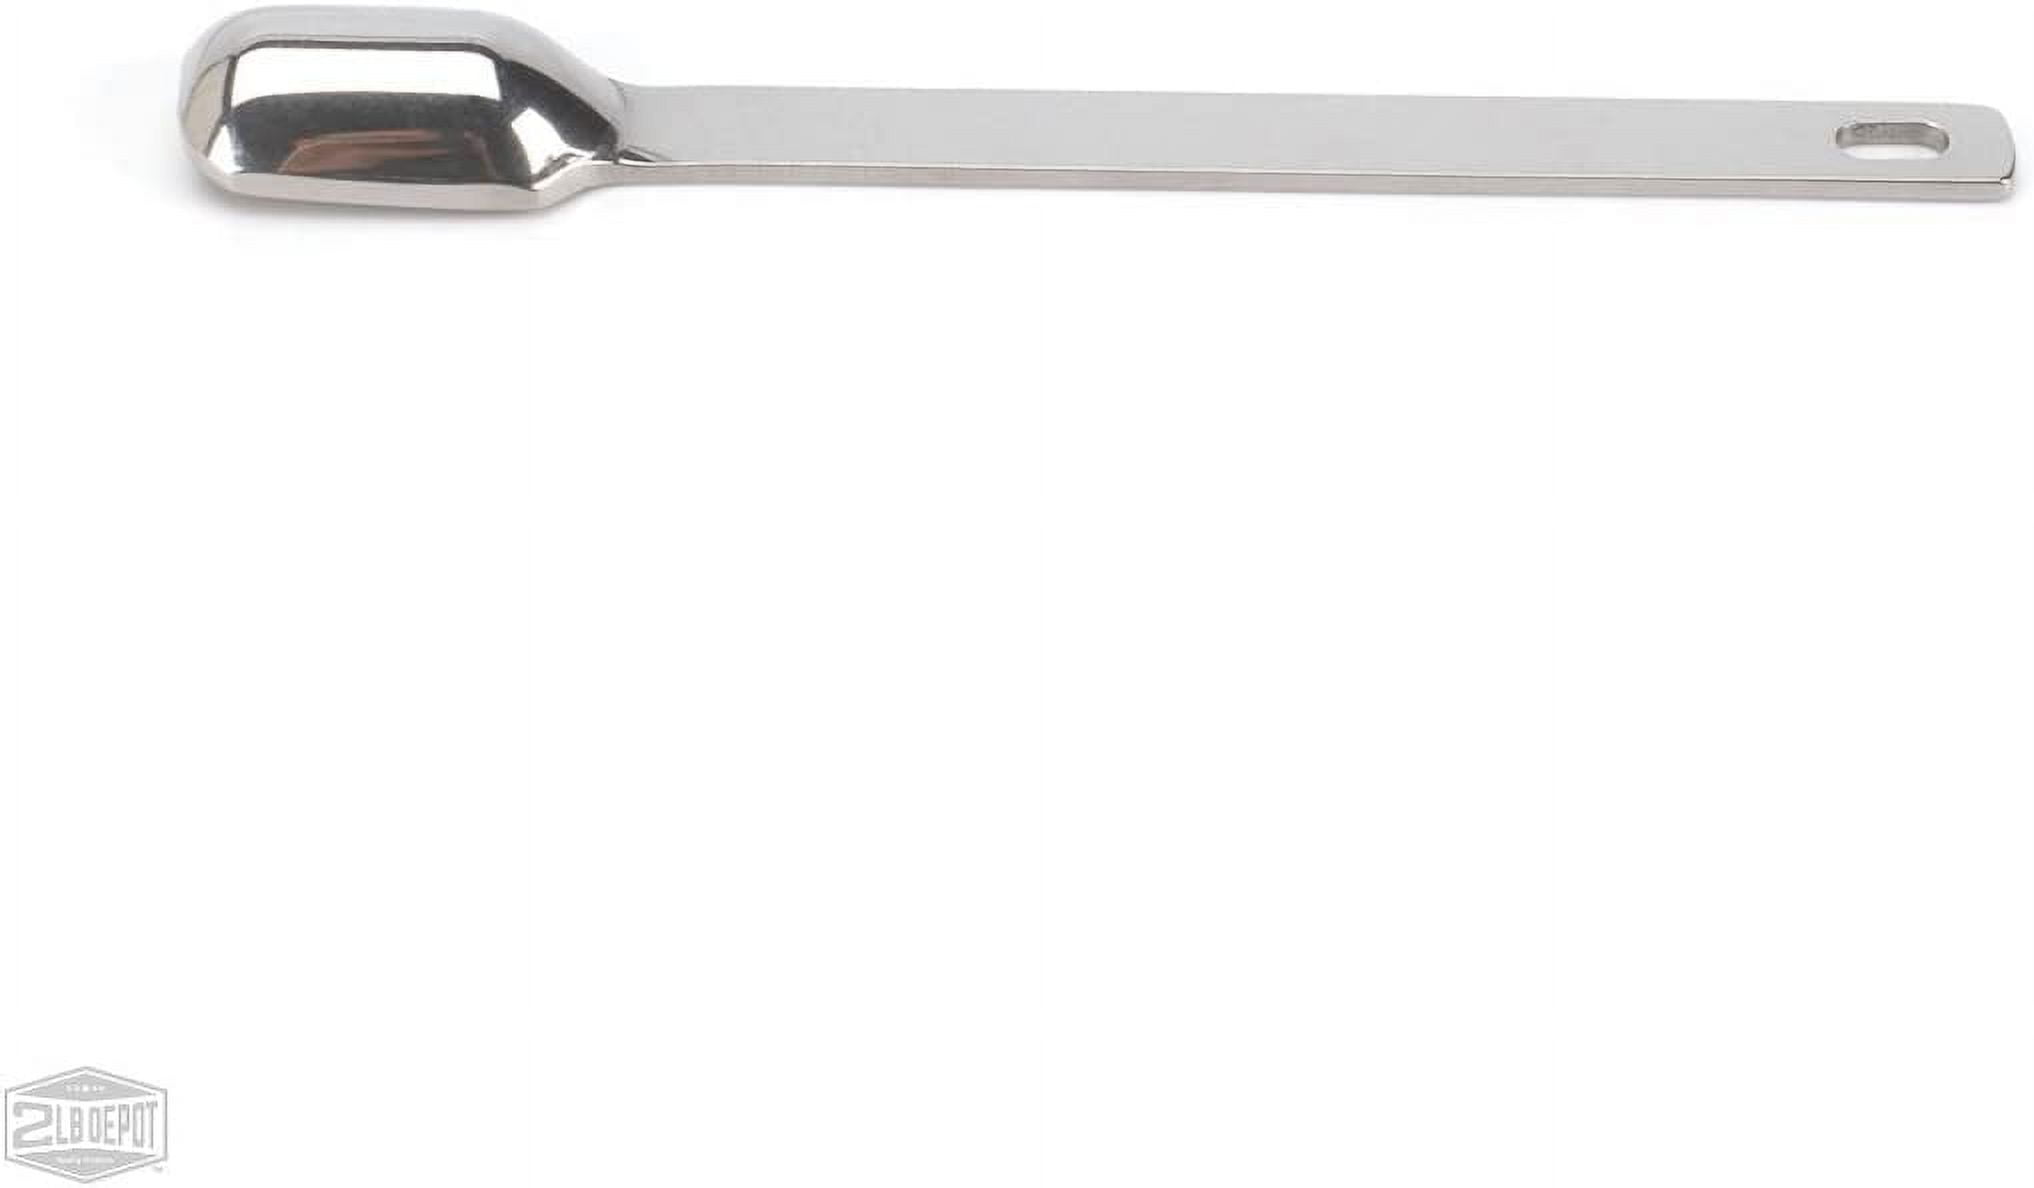 2 Lb Depot 1 Tablespoon Measuring Spoon - Stainless Steel, Narrow